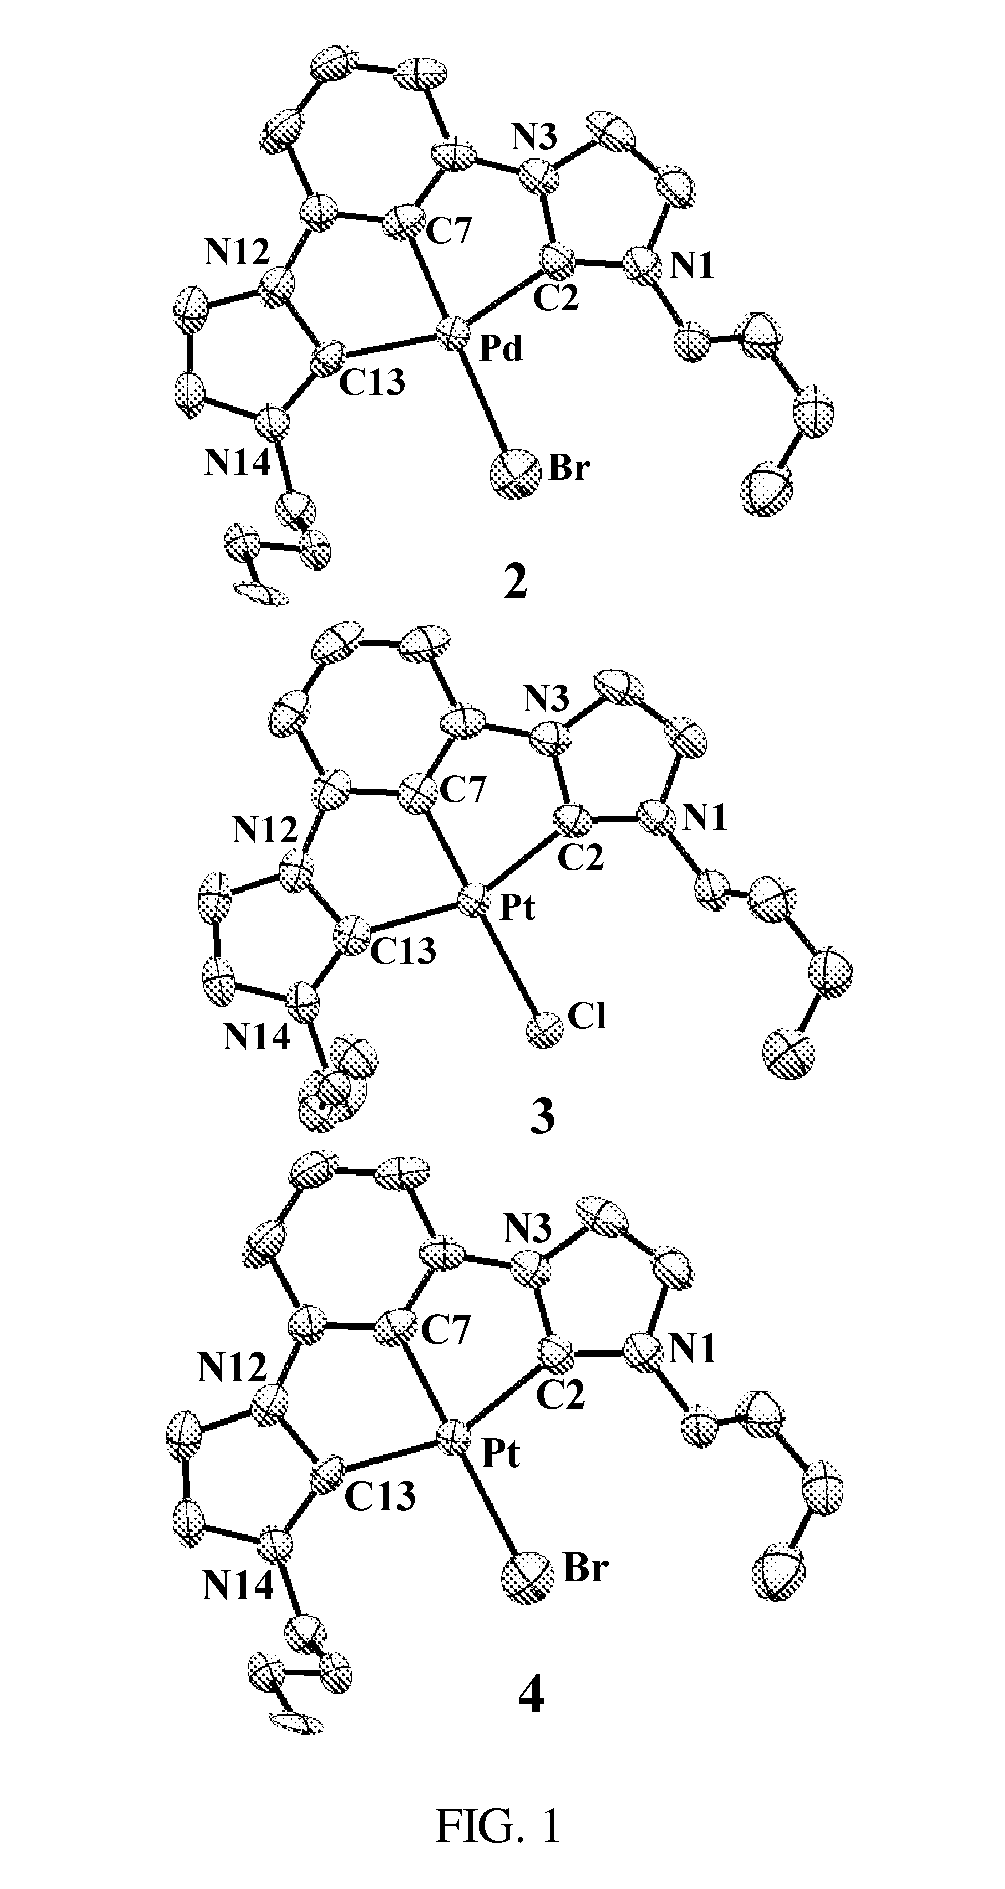 Air-stable, blue light emitting chemical compounds